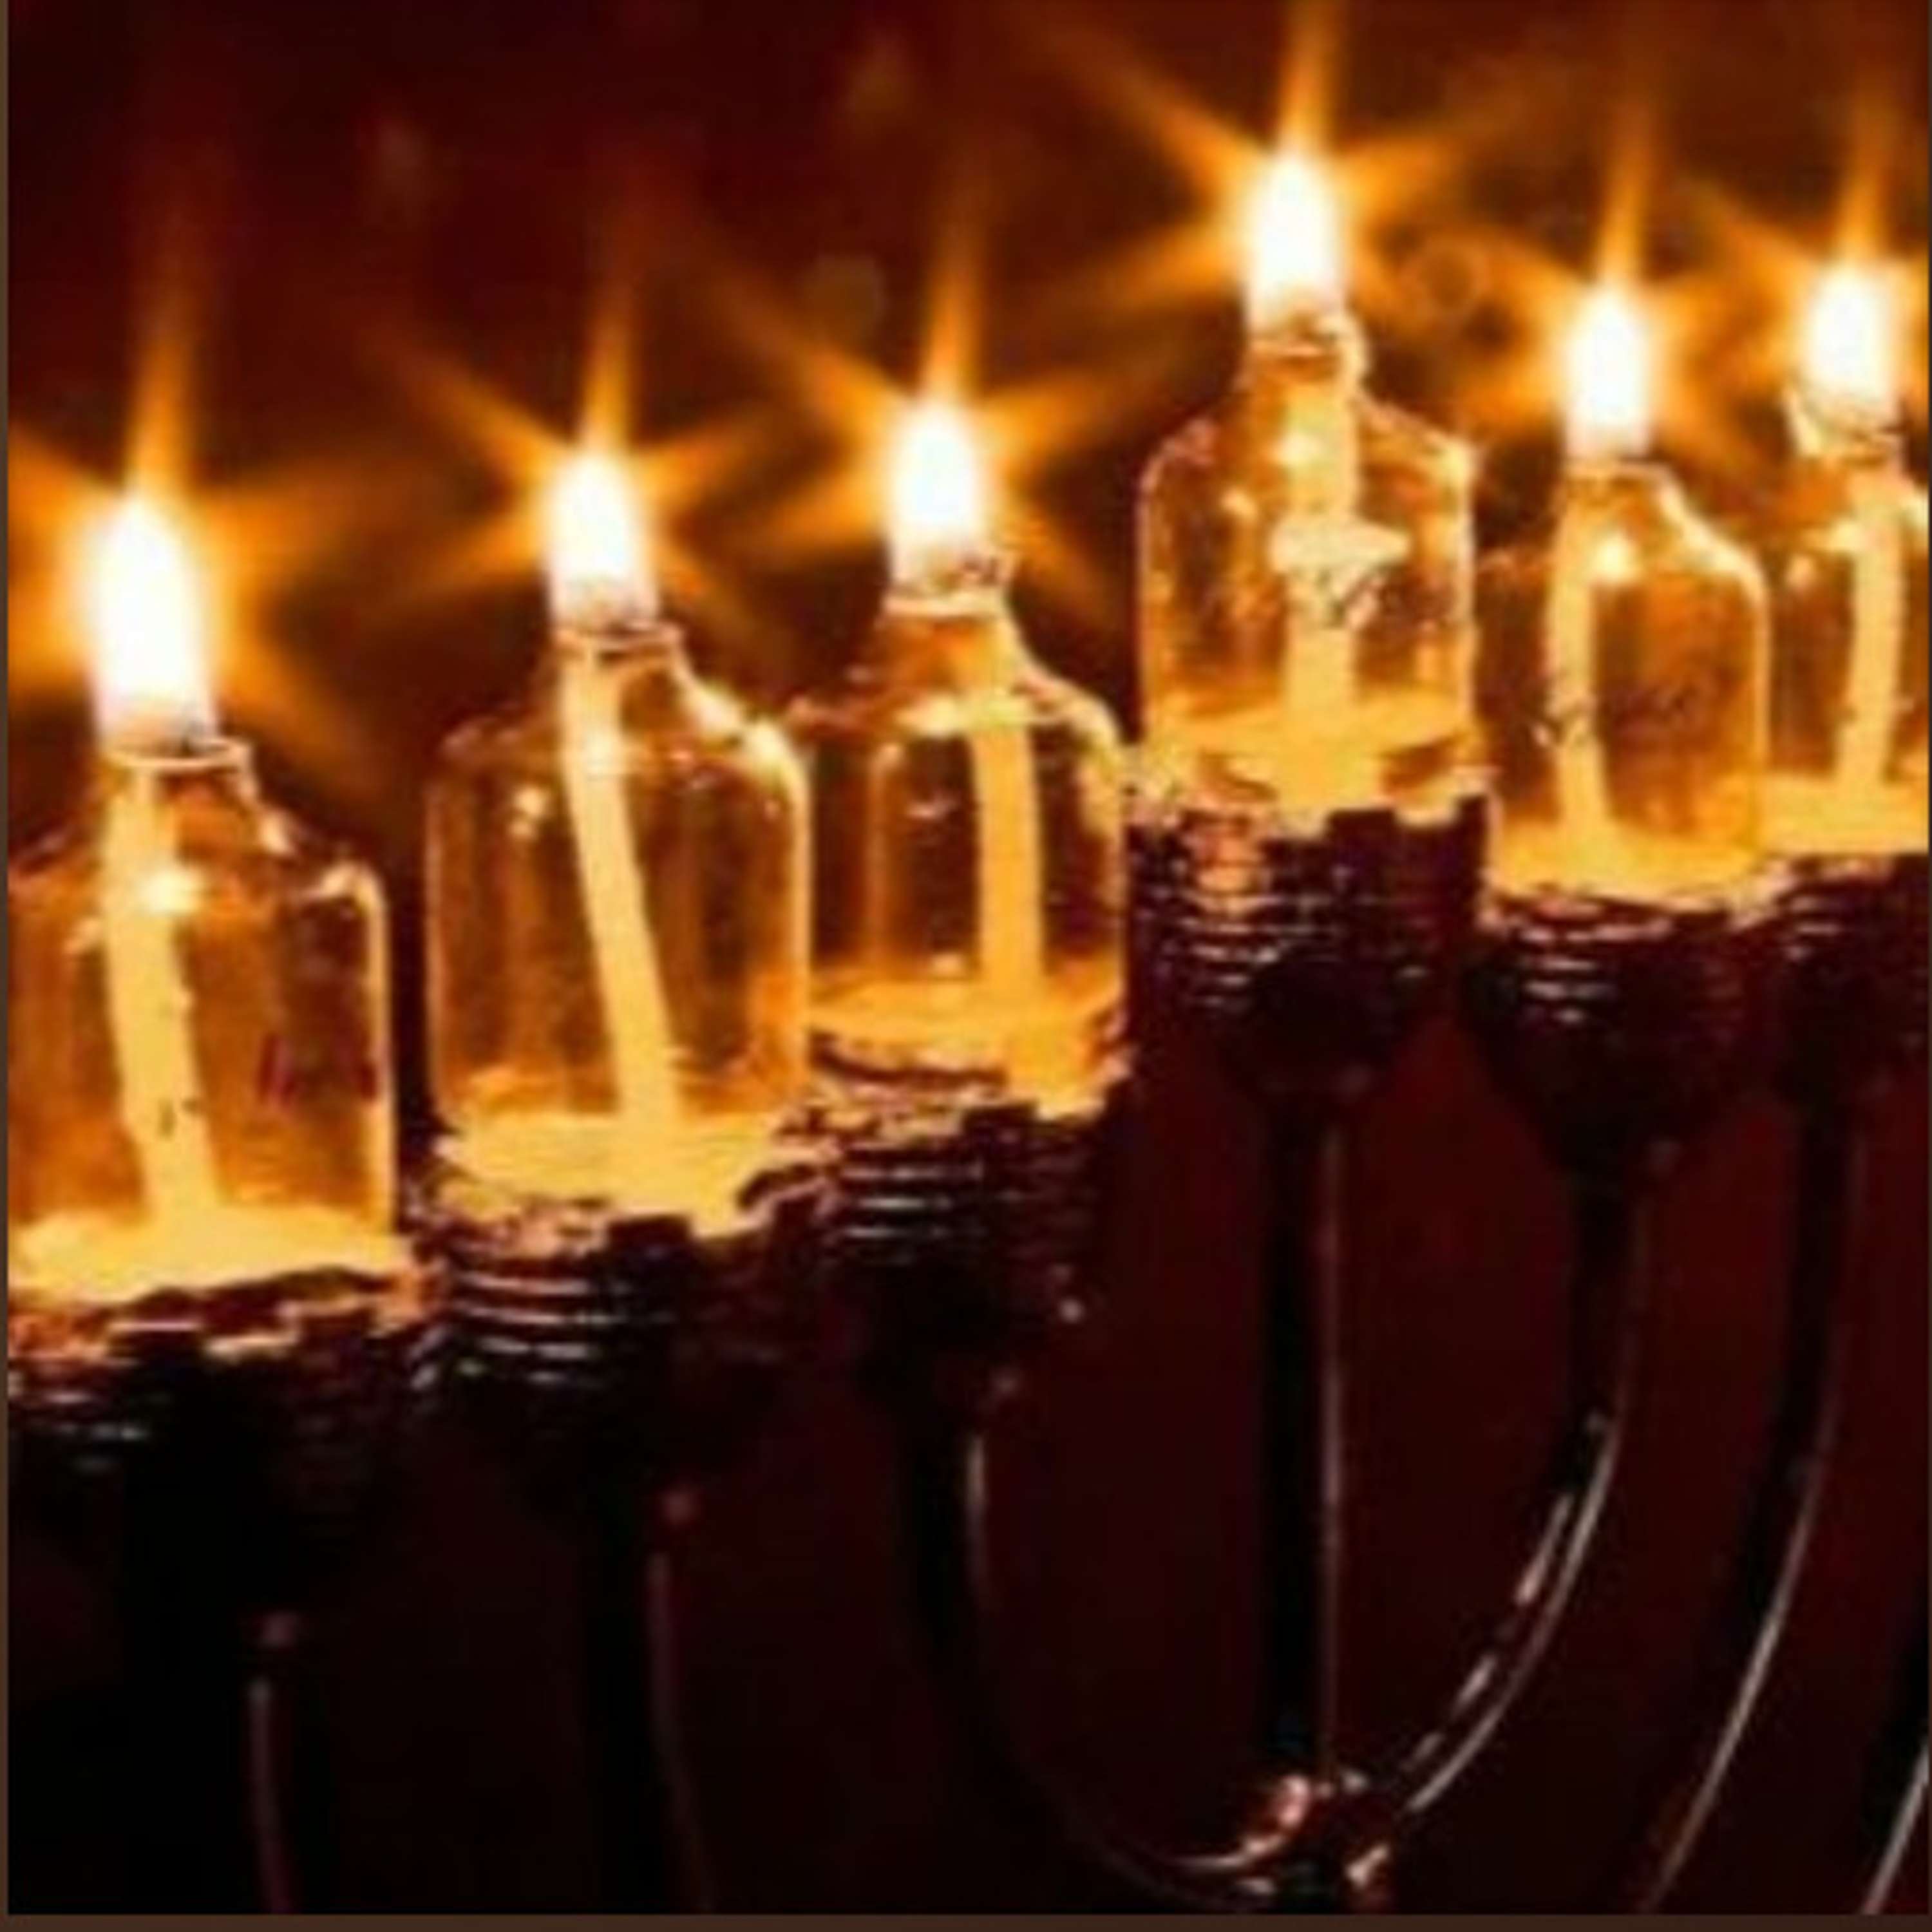 Renewed Strength from the Chanukah Candles